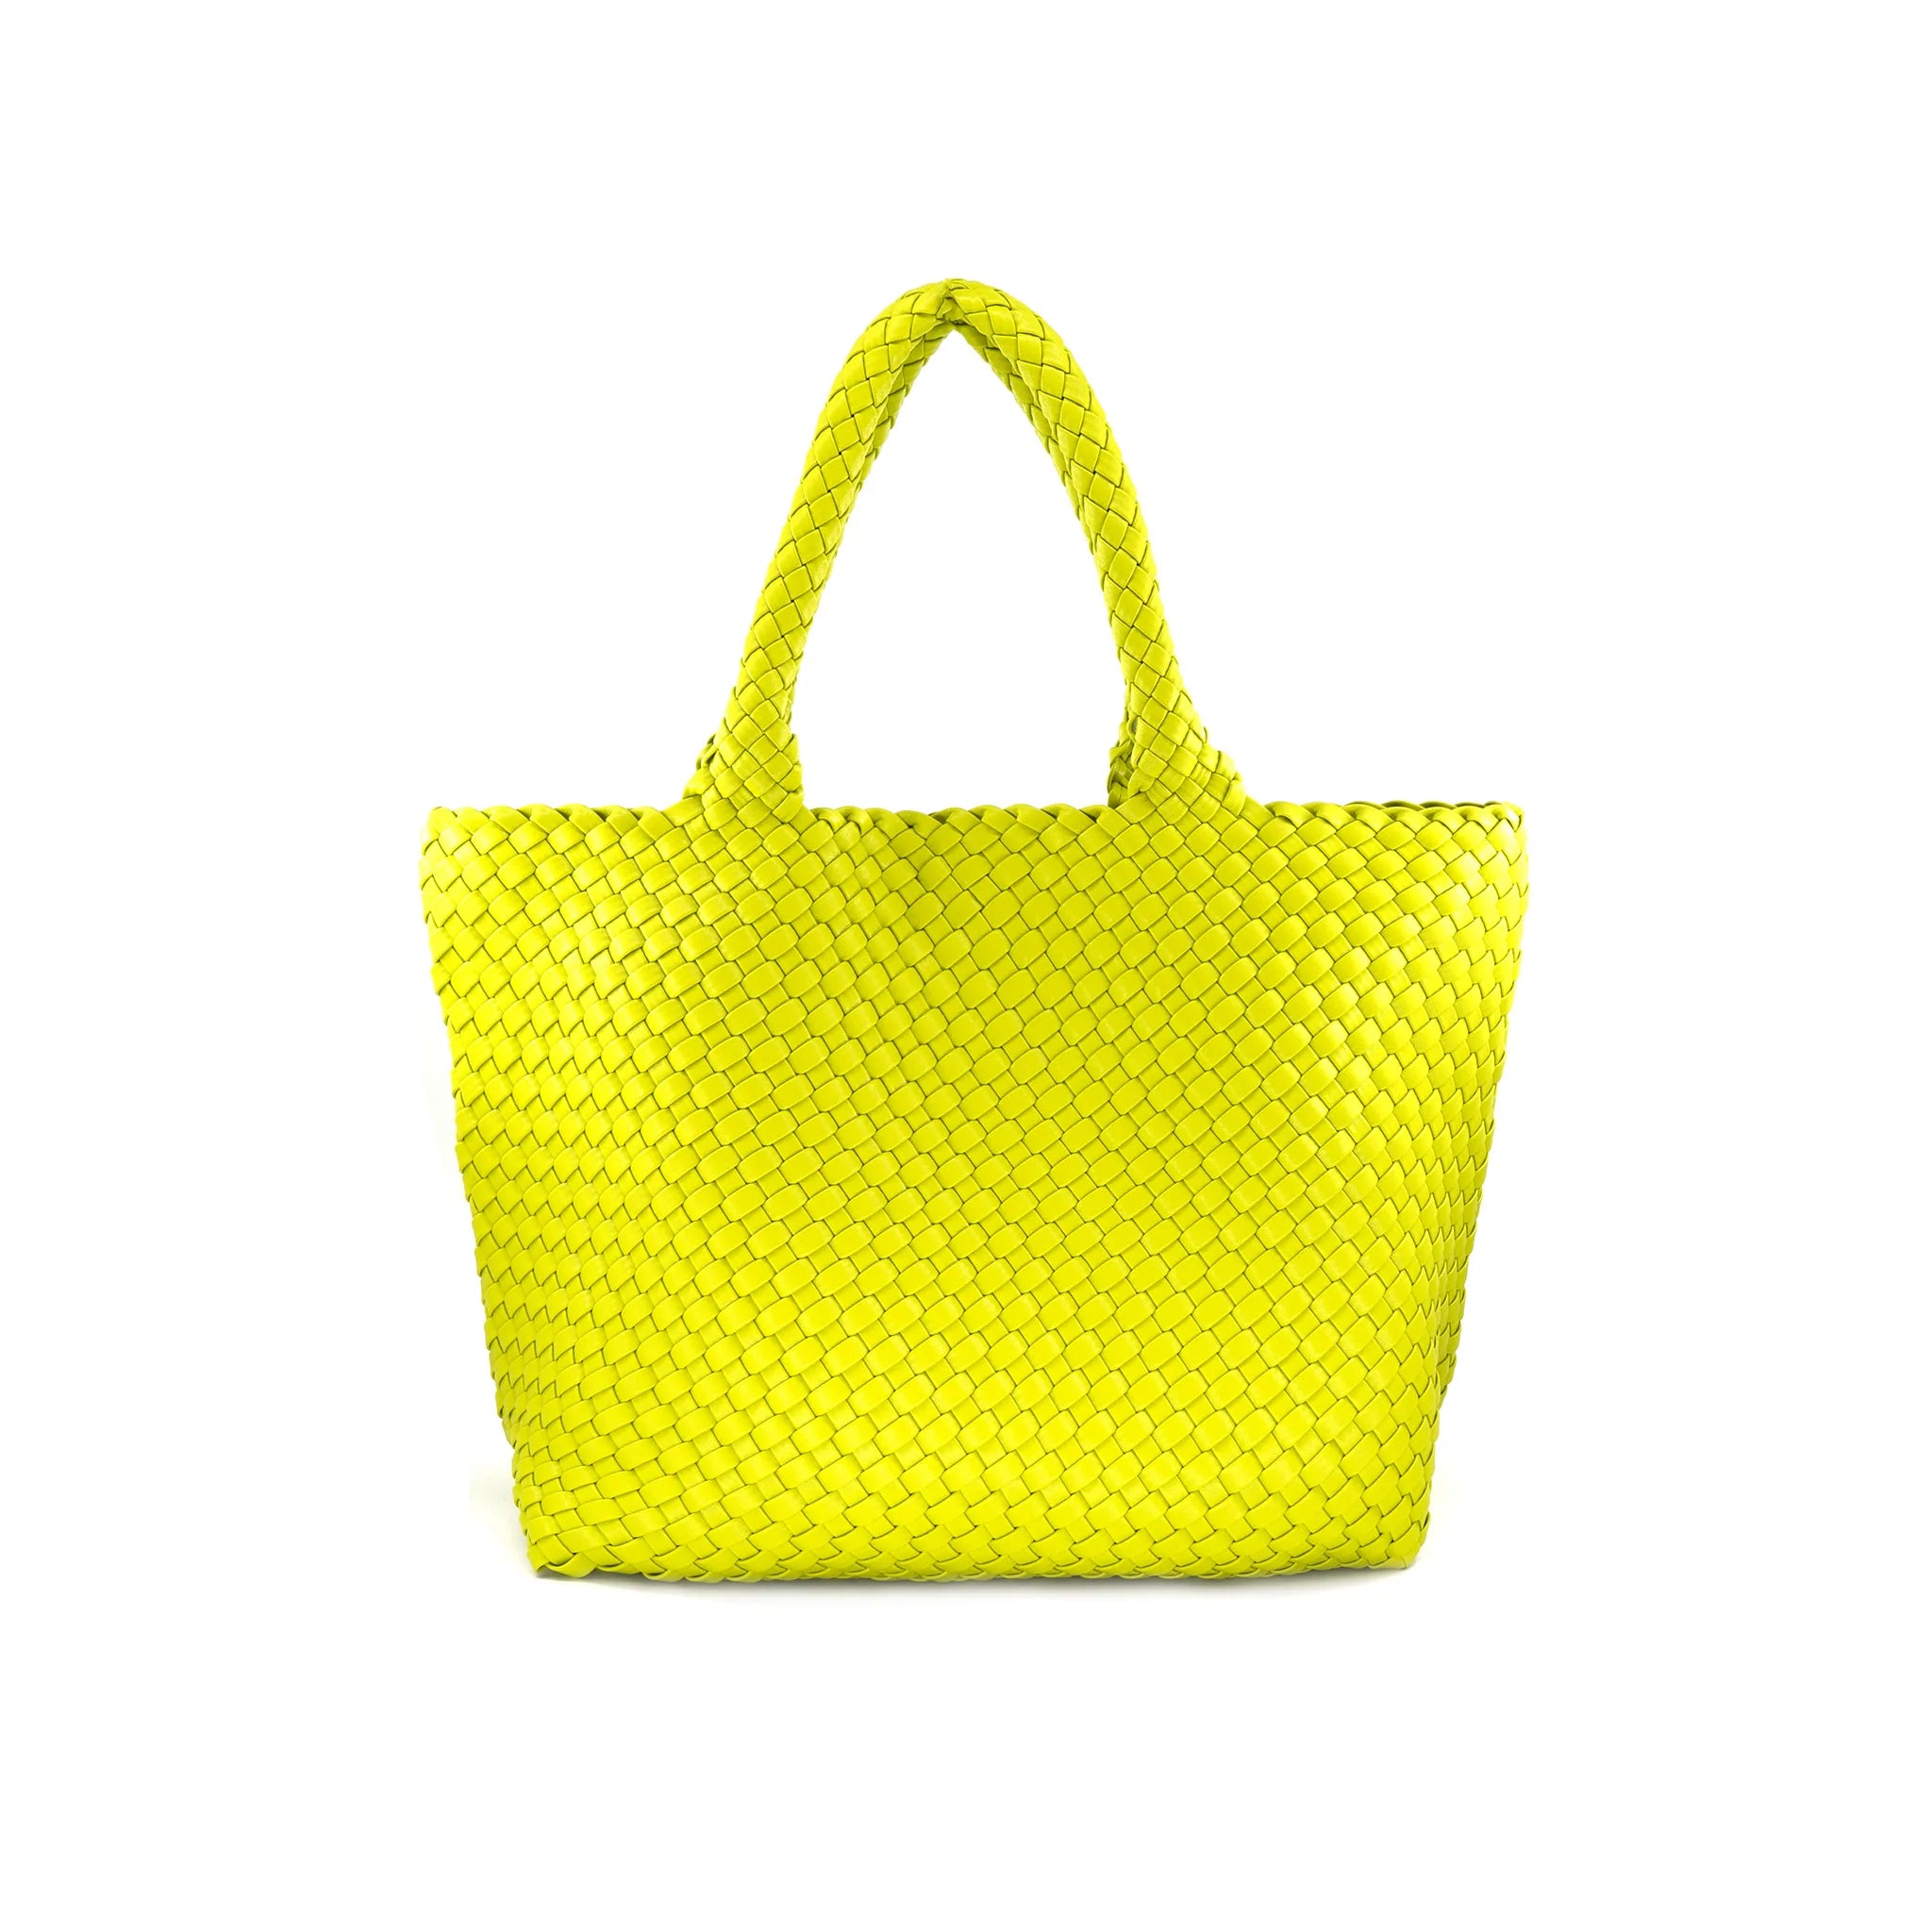 Woven Tote in Lime